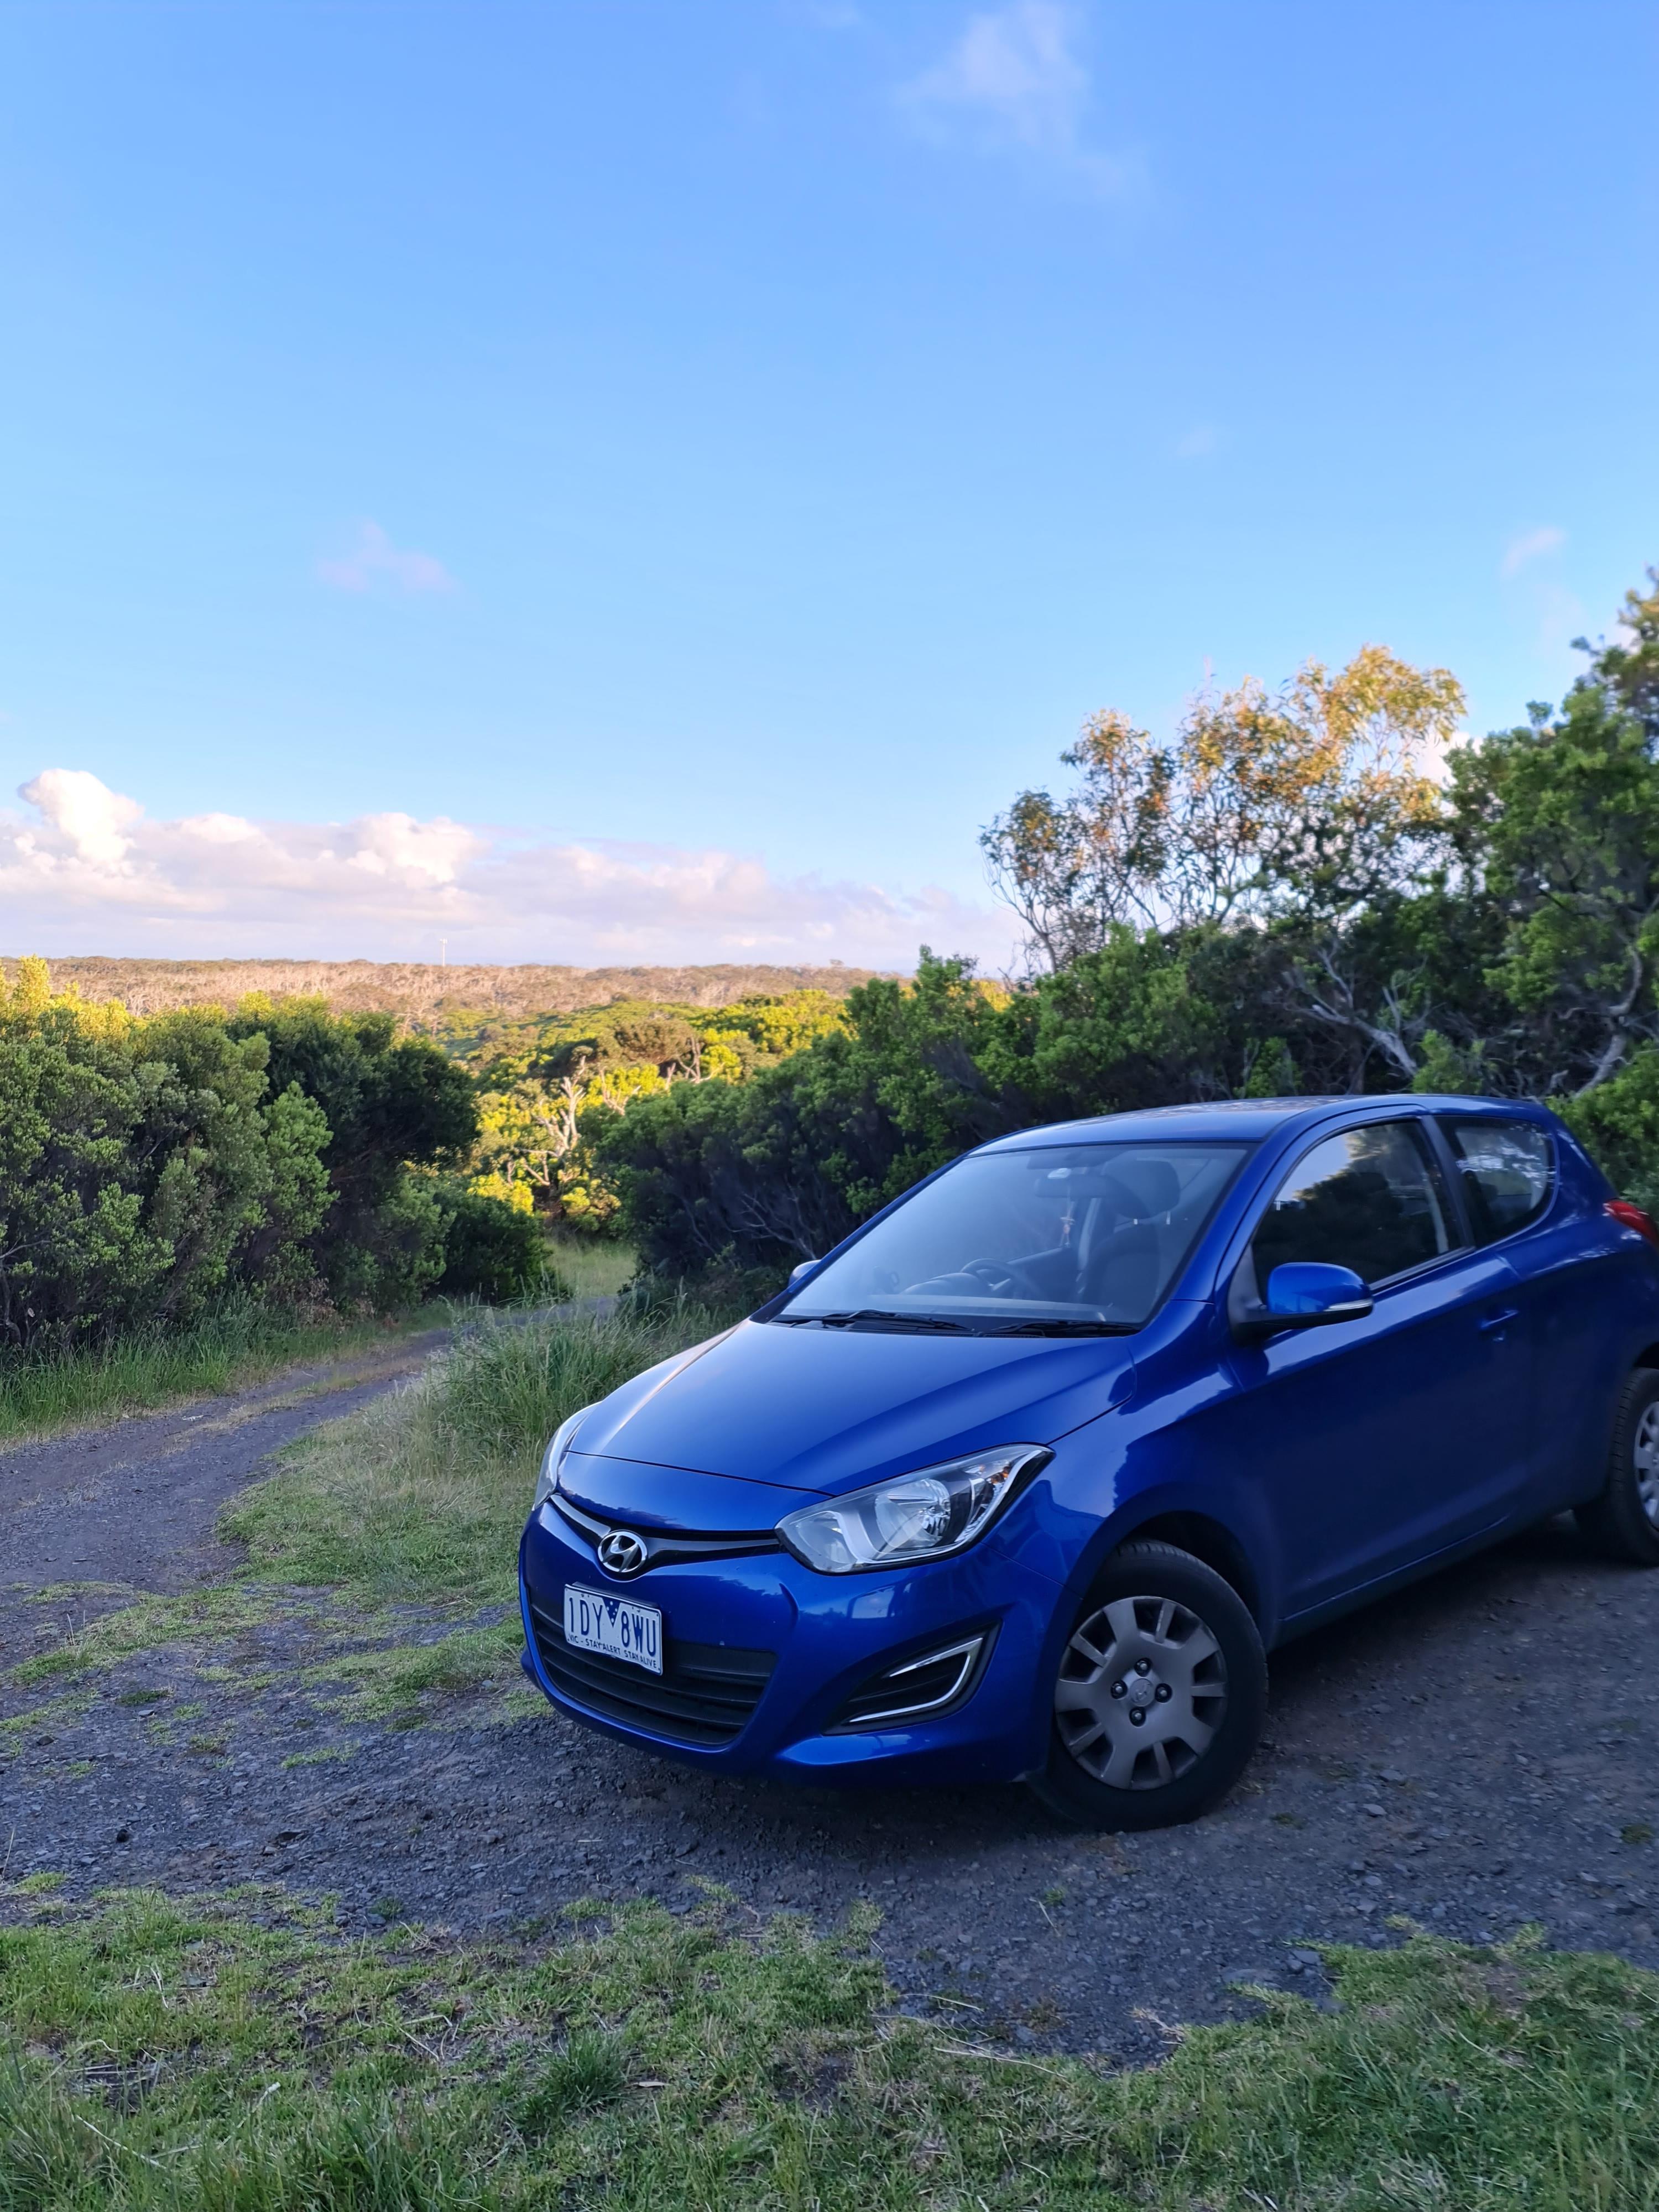 Hyundai i20 Review, For Sale, Specs, Models & News in Australia